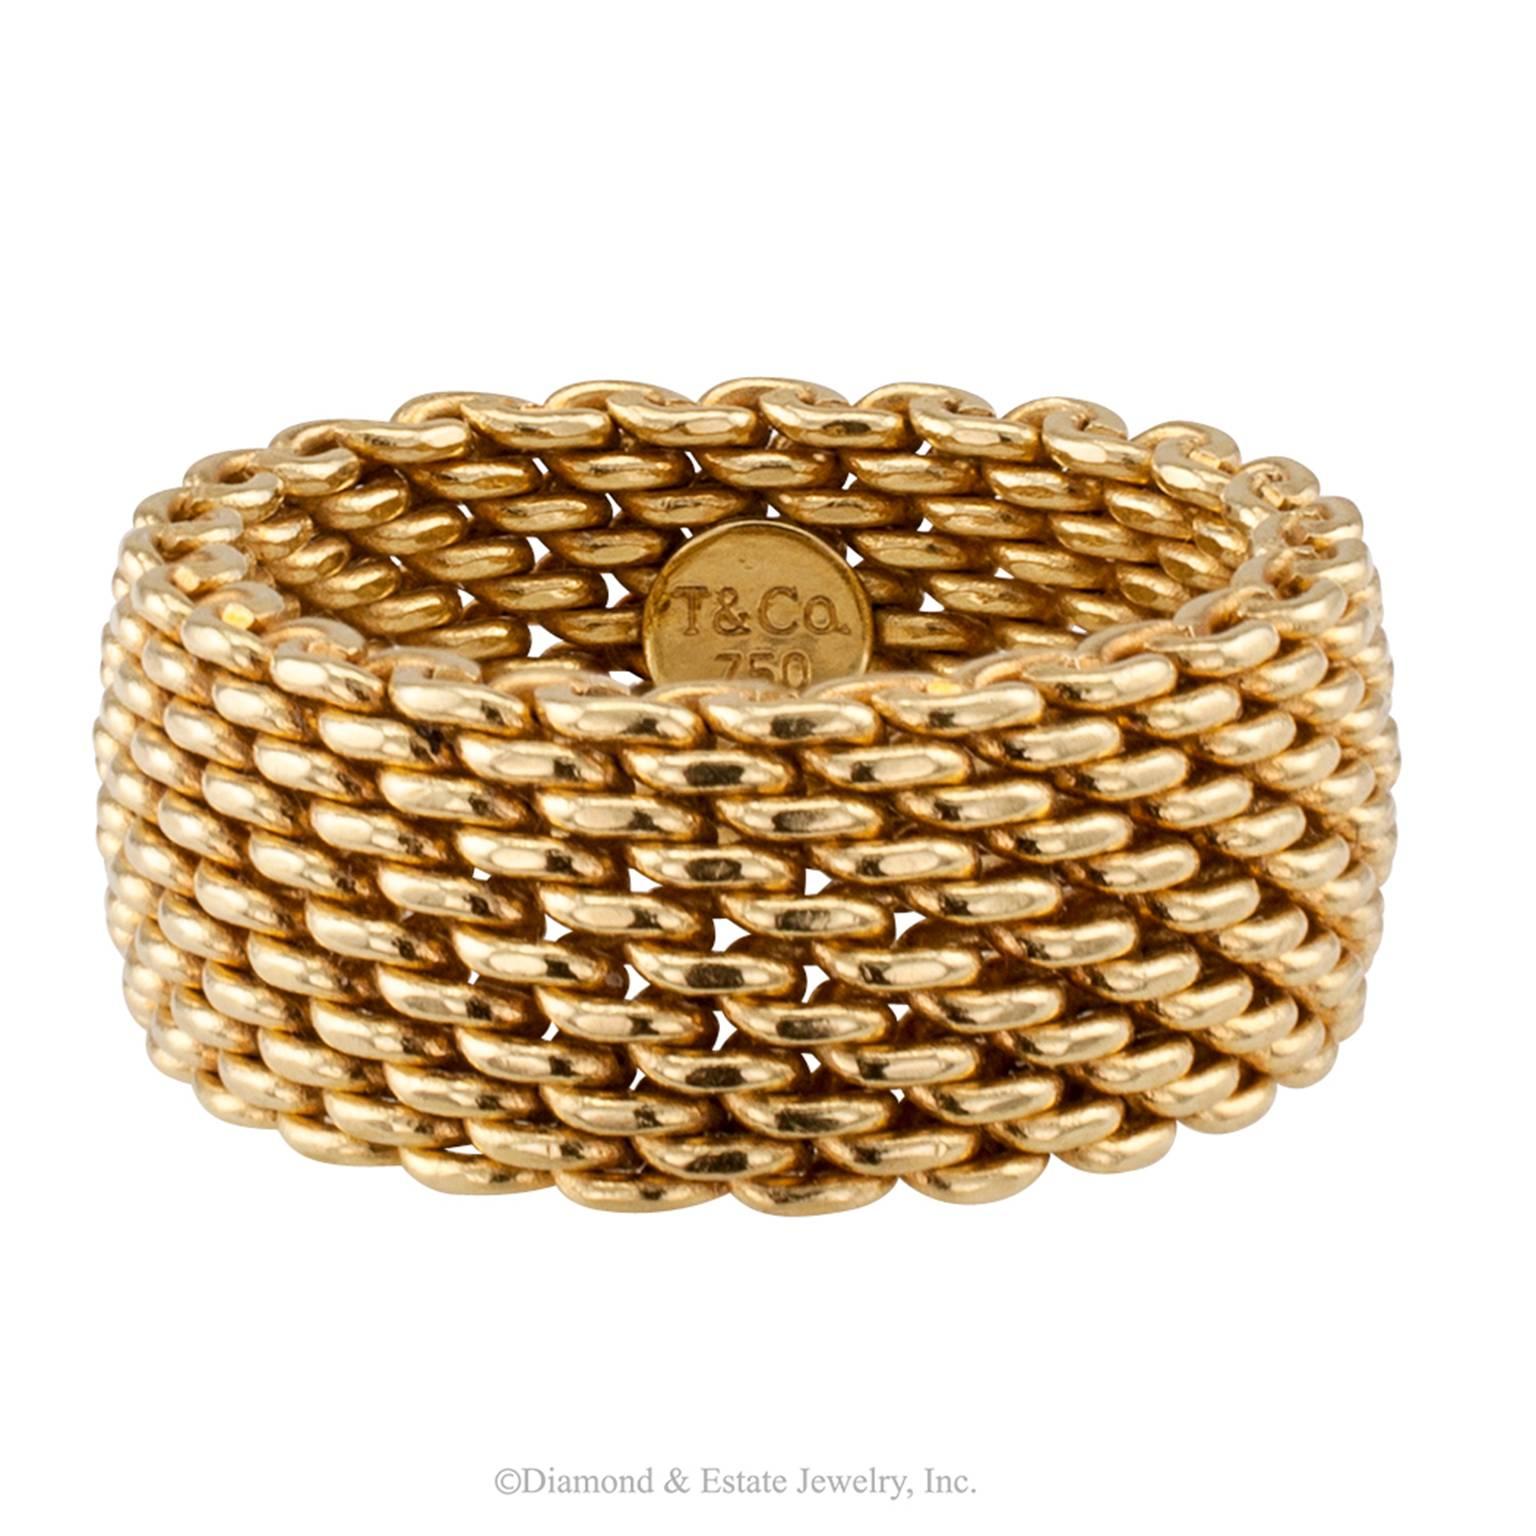 Tiffany Woven Gold Ring Band

Tiffany woven mesh ring band.  Solid 18-karat yellow gold links interwoven to form a wide ring band characterized by a pliable and silky texture, signed T & Co. for Tiffany and Company.  A unisex ring band.
 
RING SIZE: